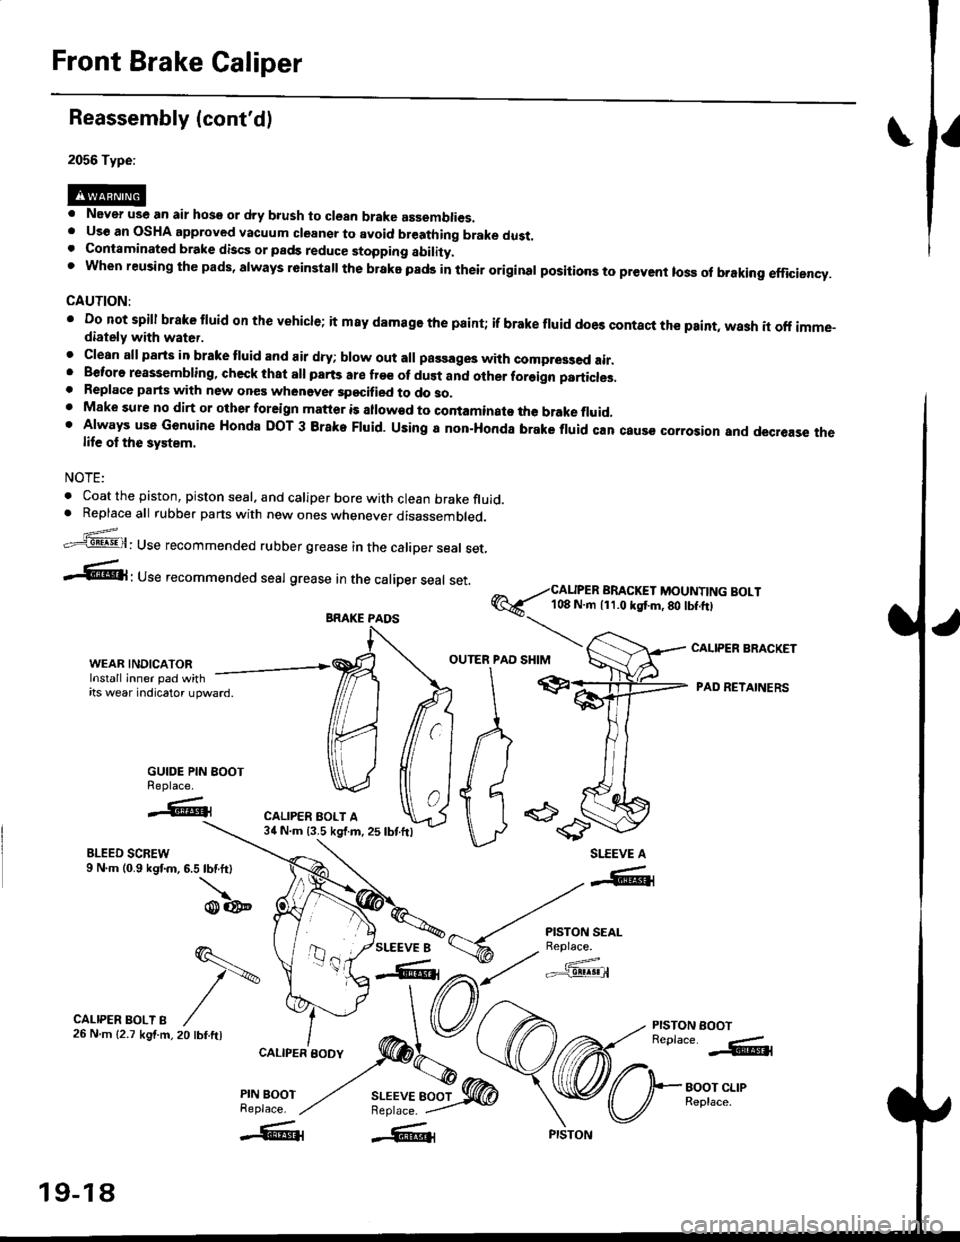 HONDA CIVIC 2000 6.G Workshop Manual Front Brake Caliper
Reassembly (contd)
2056 Type:
. Never use an air hose or dry b.ush to clean brake assemblies.. Uso an OSHA approved vacuum cleansr to avoid breathing brake dust.. Contaminated bra